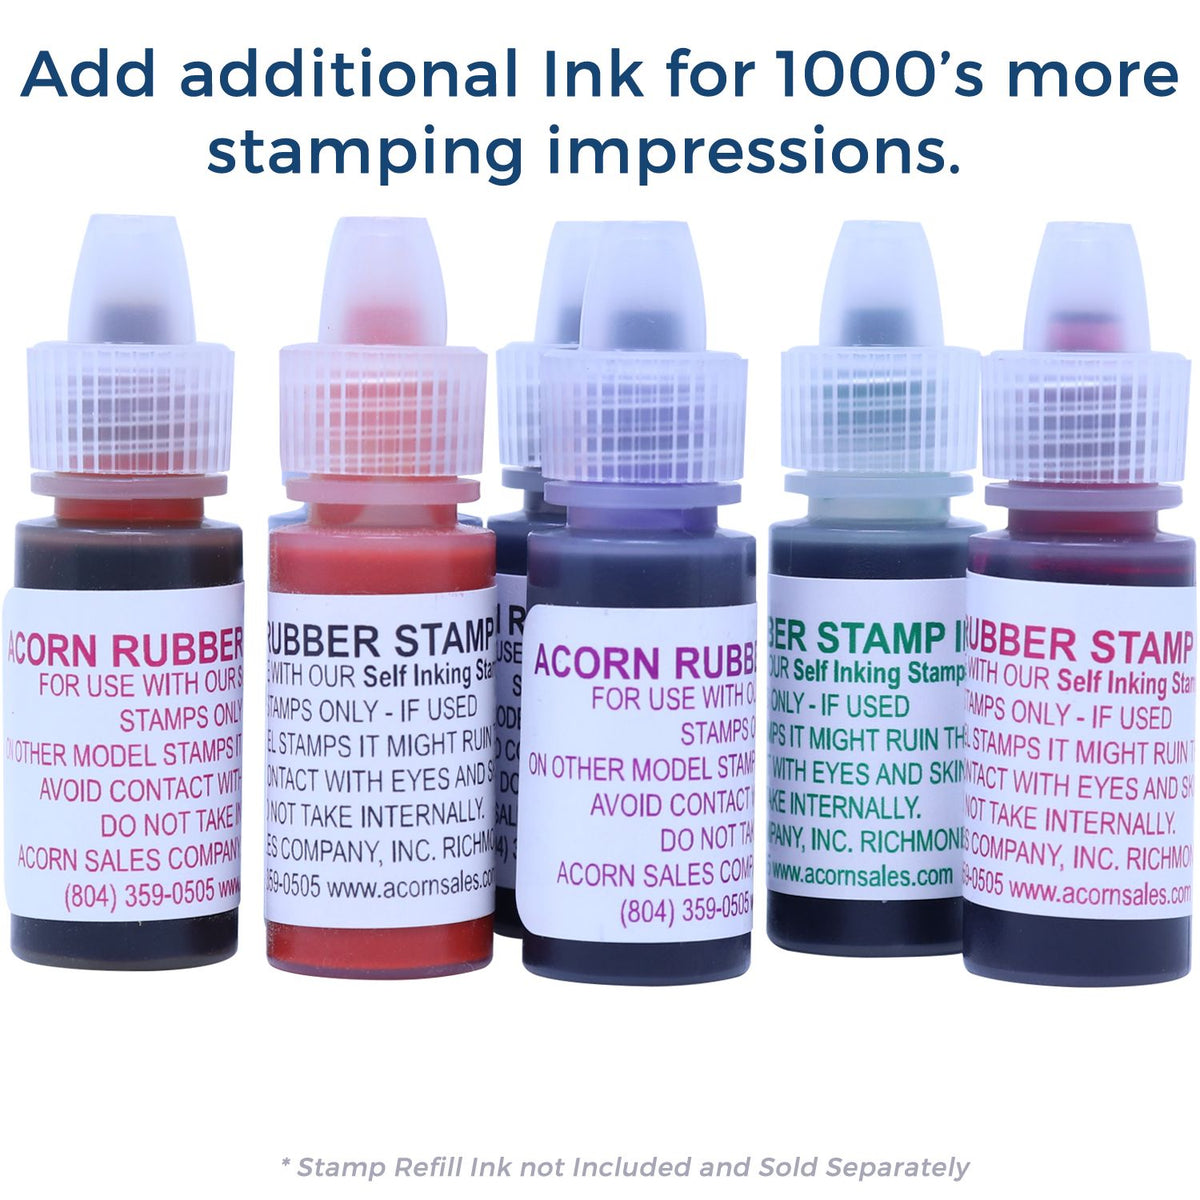 Refill Ink for Self-Inking Round Faxed Stamp Available